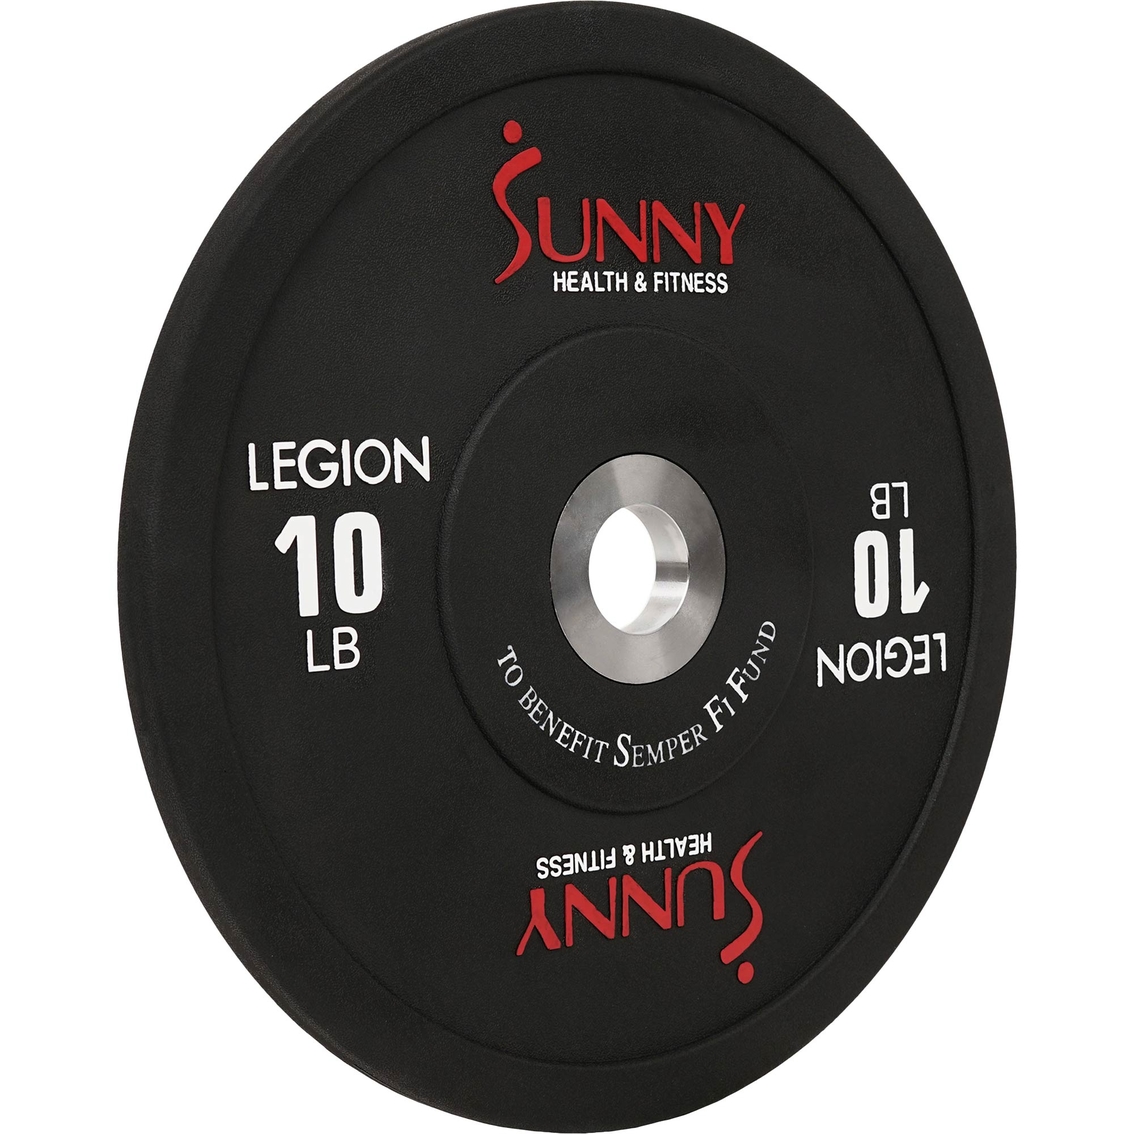 Sunny Health & Fitness Olympic Bumper Weight Plate 10 lb. - Image 2 of 3